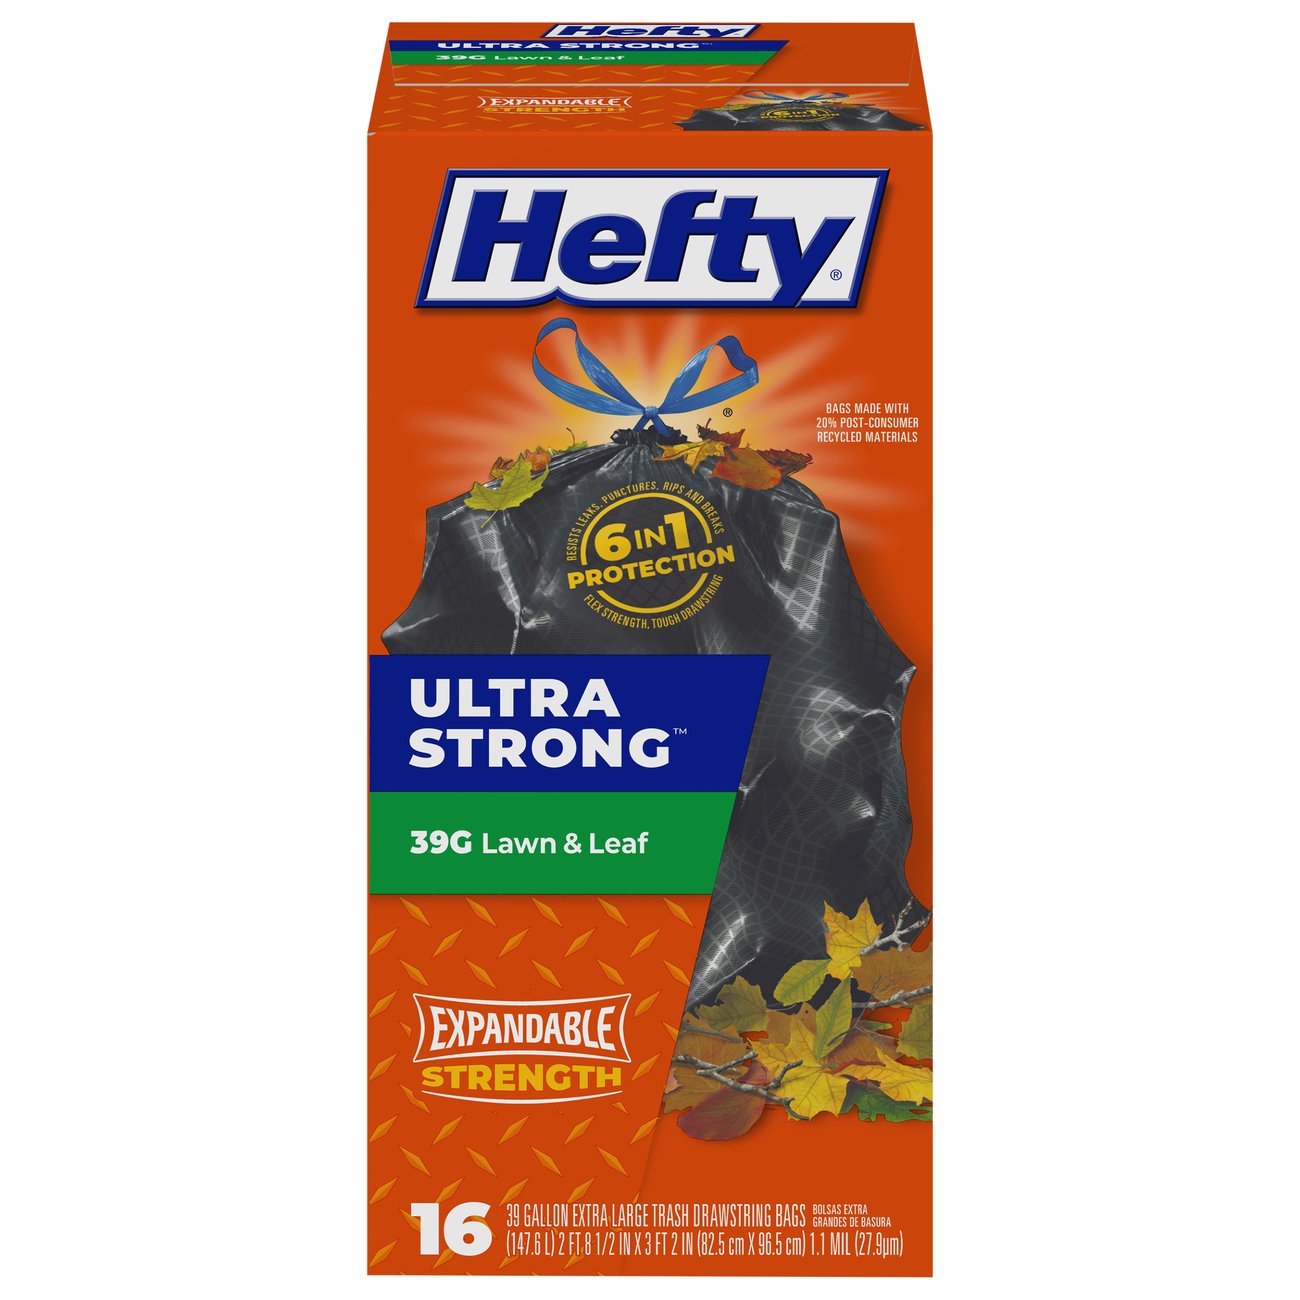 Hefty Strong Lawn & Leaf Trash Bags, 39 Gallon, 40 Count 